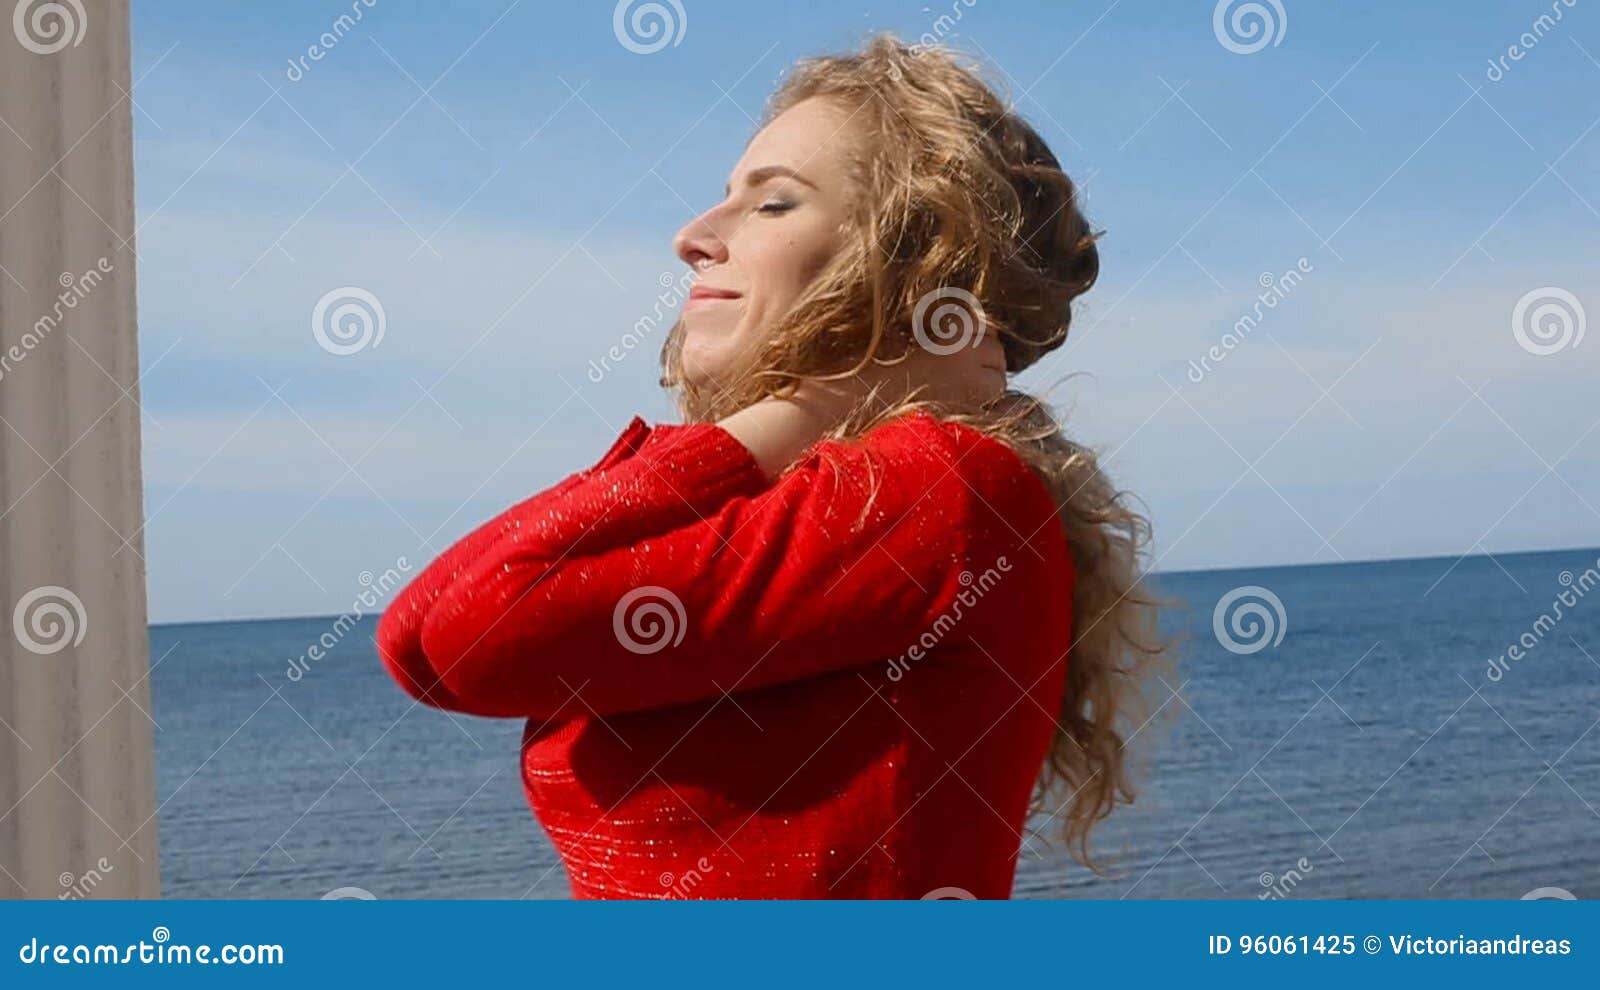 Close Up Portrait Of Woman Running Hand Through Curly Hair Blowing In Wind By Sea On Beach 